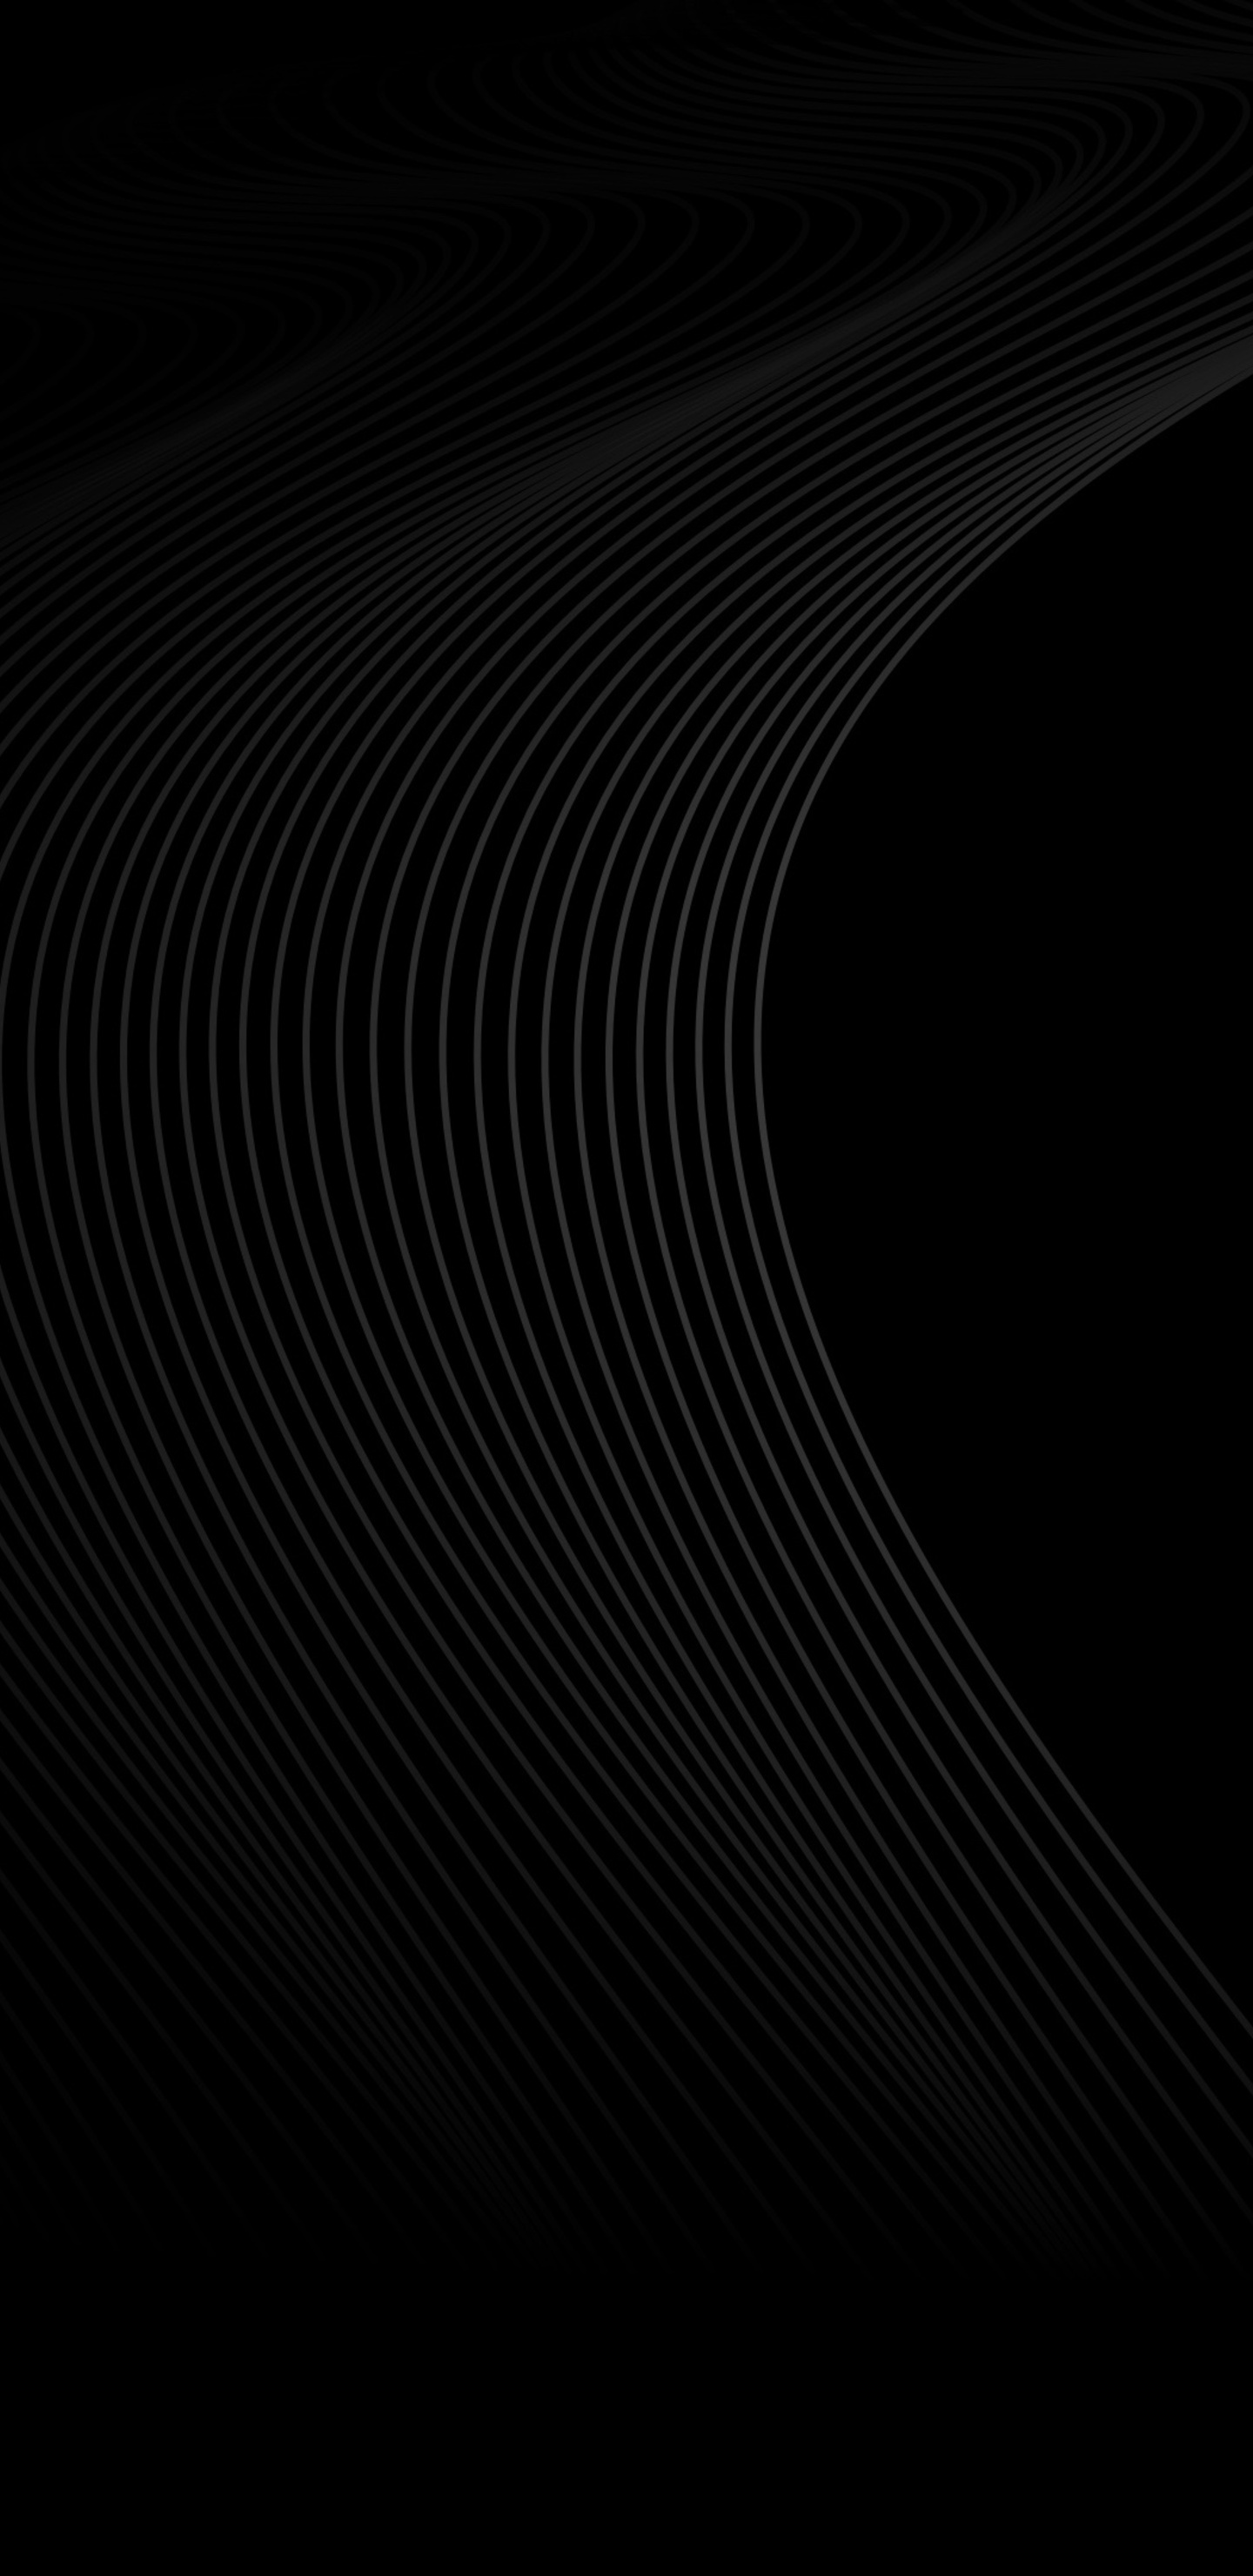 1440x2960 Abstract Lines Dark 4k Samsung Galaxy Note 9,8, S9,S8,S8+ QHD HD  4k Wallpapers, Images, Backgrounds, Photos and Pictures